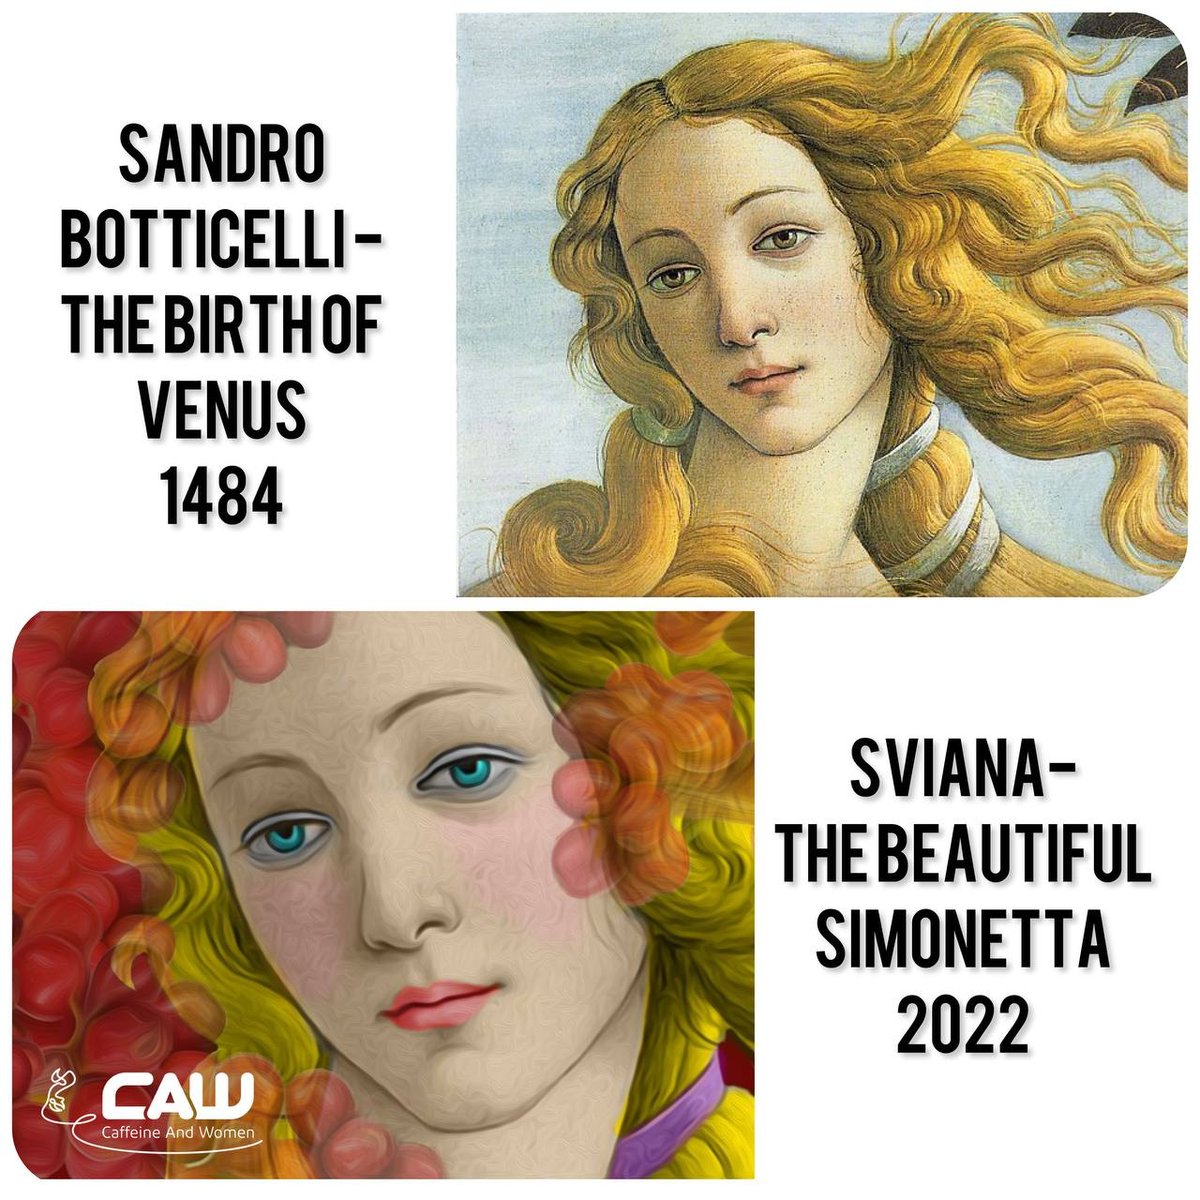 A modern rendition of The Beautiful Simonetta. Influenced by coffee and breathtaking by nature.

A “masterpiece” reborn to hold you in awe!

Artist: SViana
Available as NFT on @foundation.app
foundation.app/@CAWMVMT/cvs/23

#joinCAW #CaffeineAndWomen #Art  #WomeninWeb3